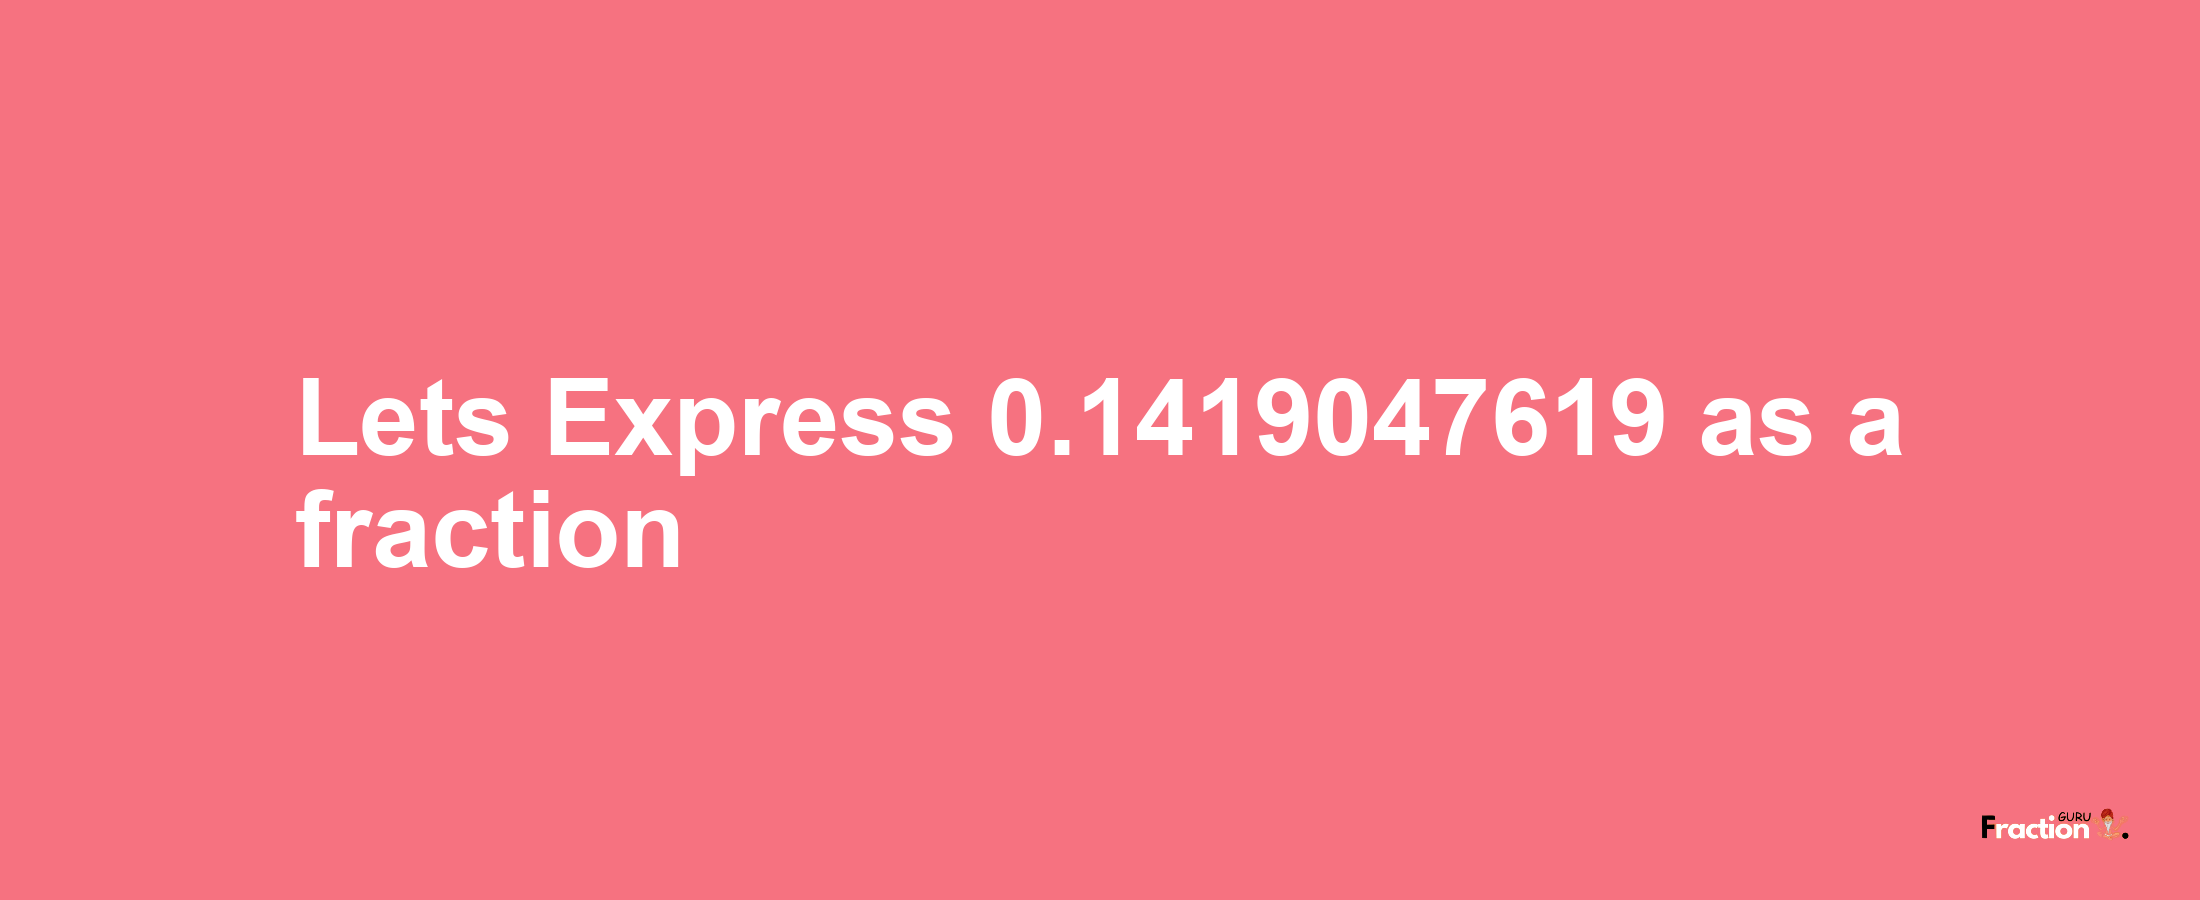 Lets Express 0.1419047619 as afraction